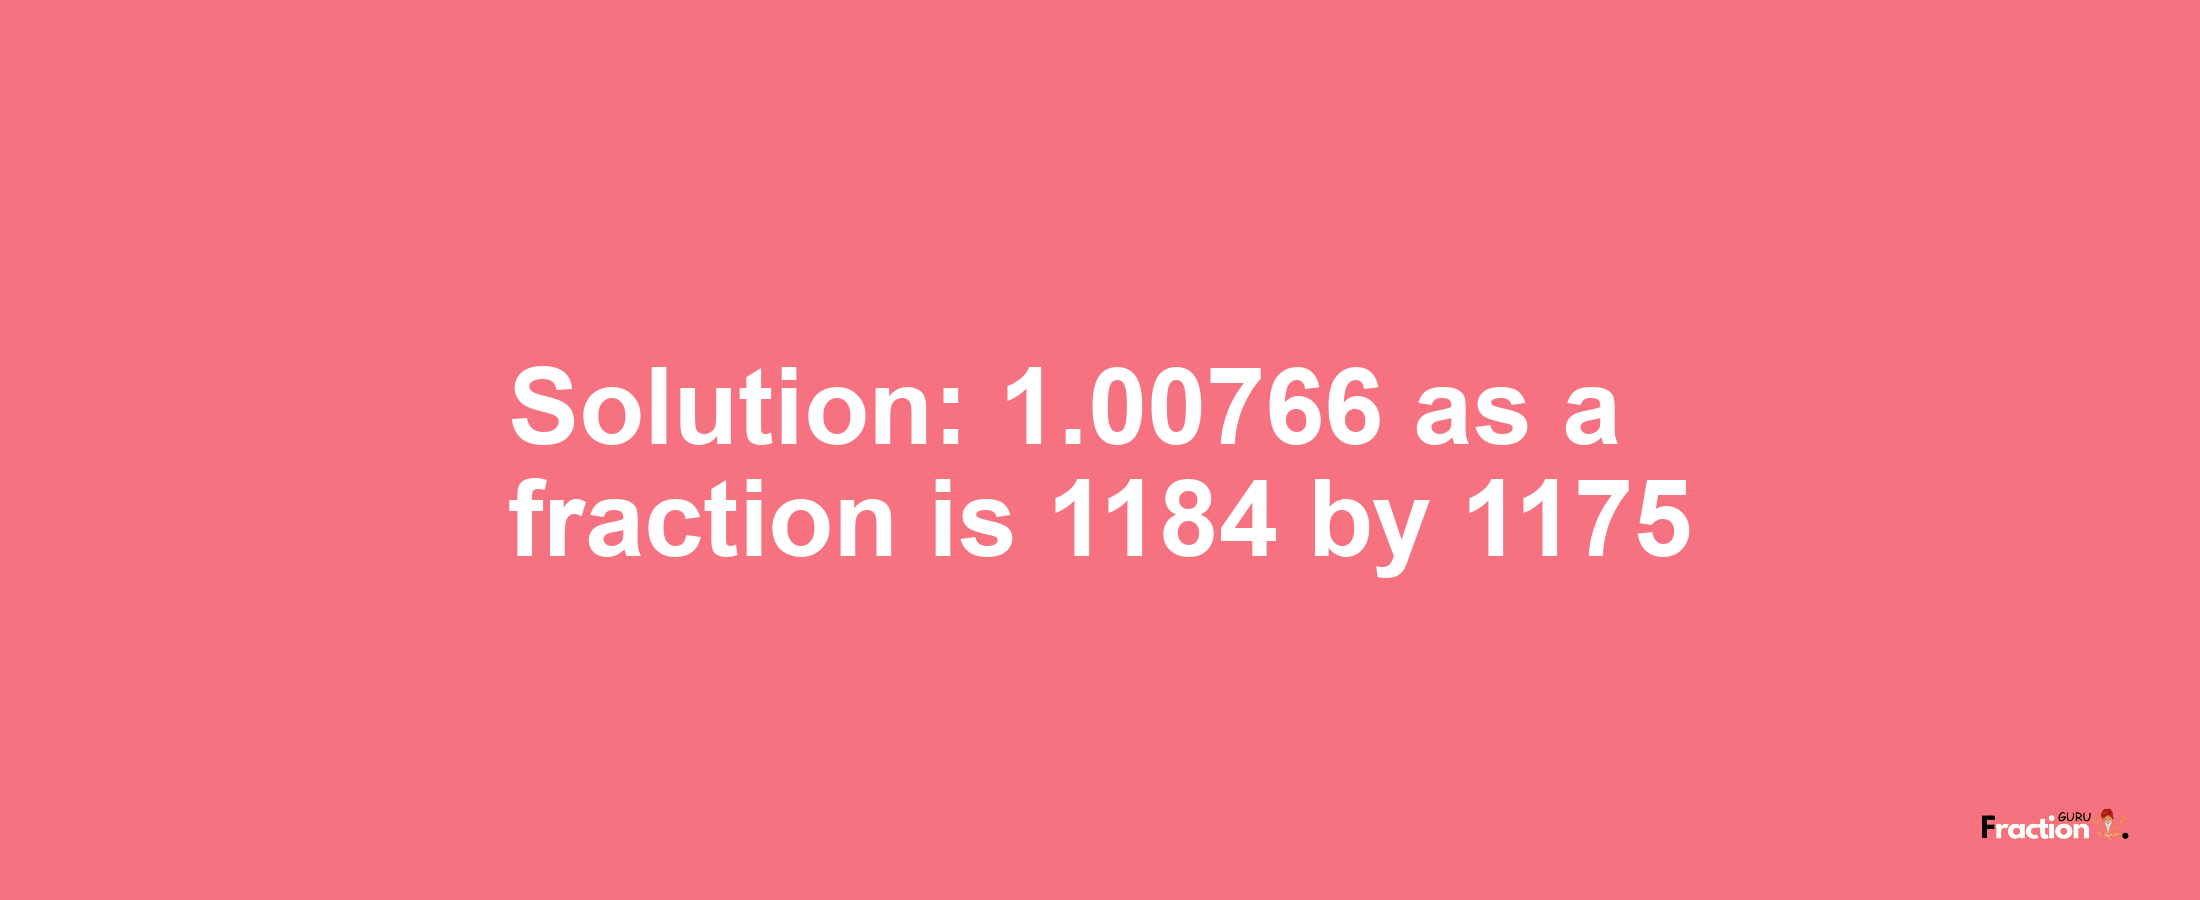 Solution:1.00766 as a fraction is 1184/1175